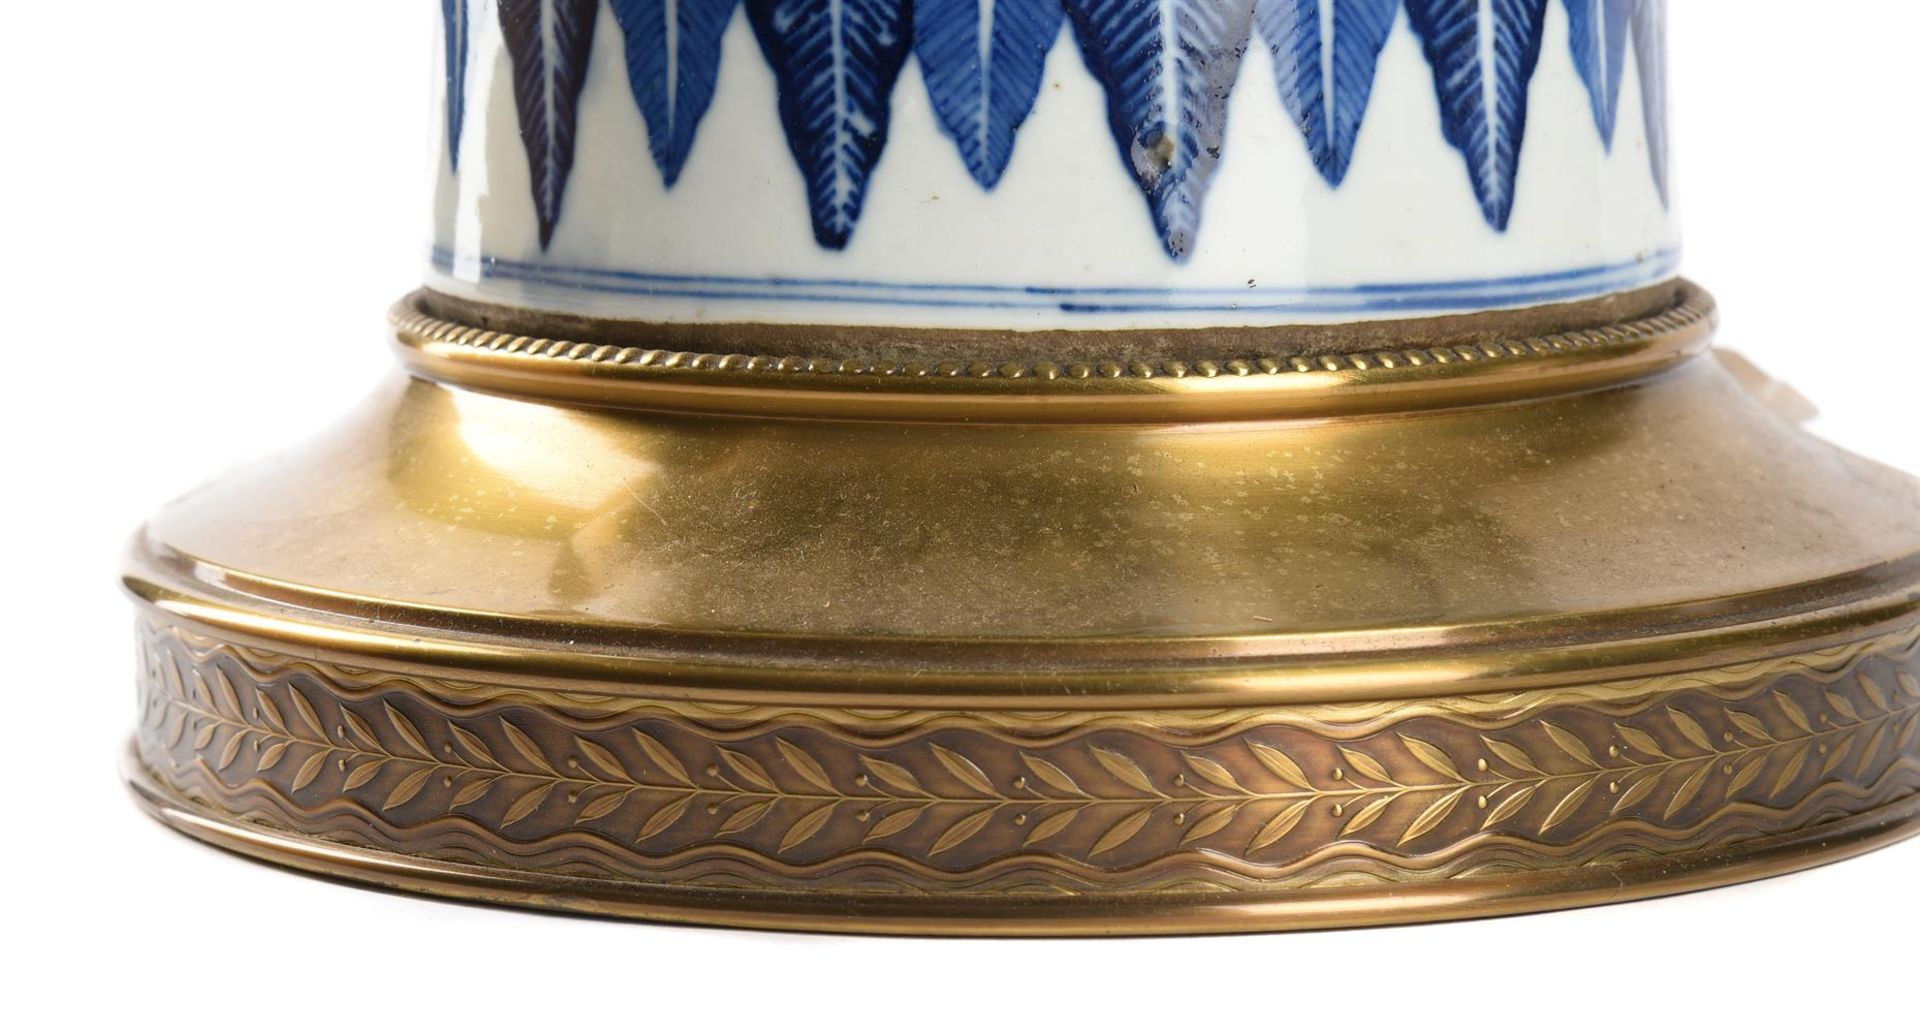 A CHINESE BLUE AND WHITE PORCELAIN AND GILT METAL MOUNTED TABLE LAMP, LATE 19TH OR 20TH CENTURY - Image 4 of 4